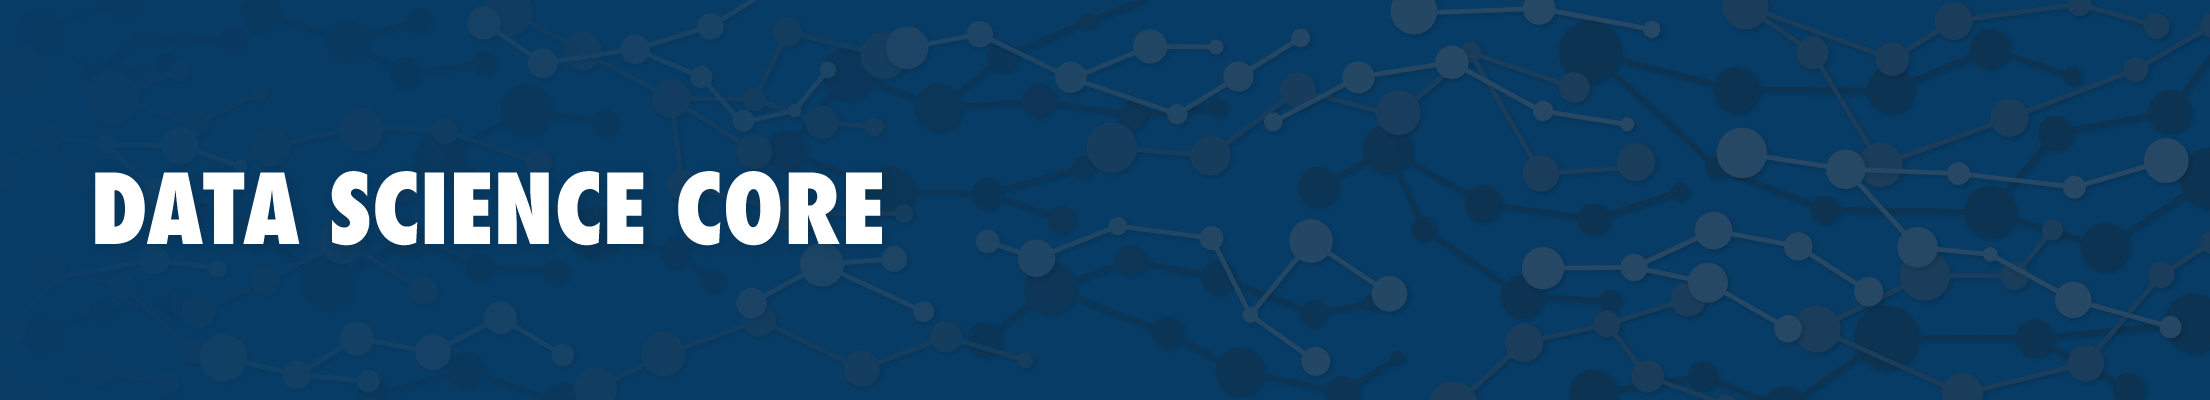 Data Science Core masthead on blue background